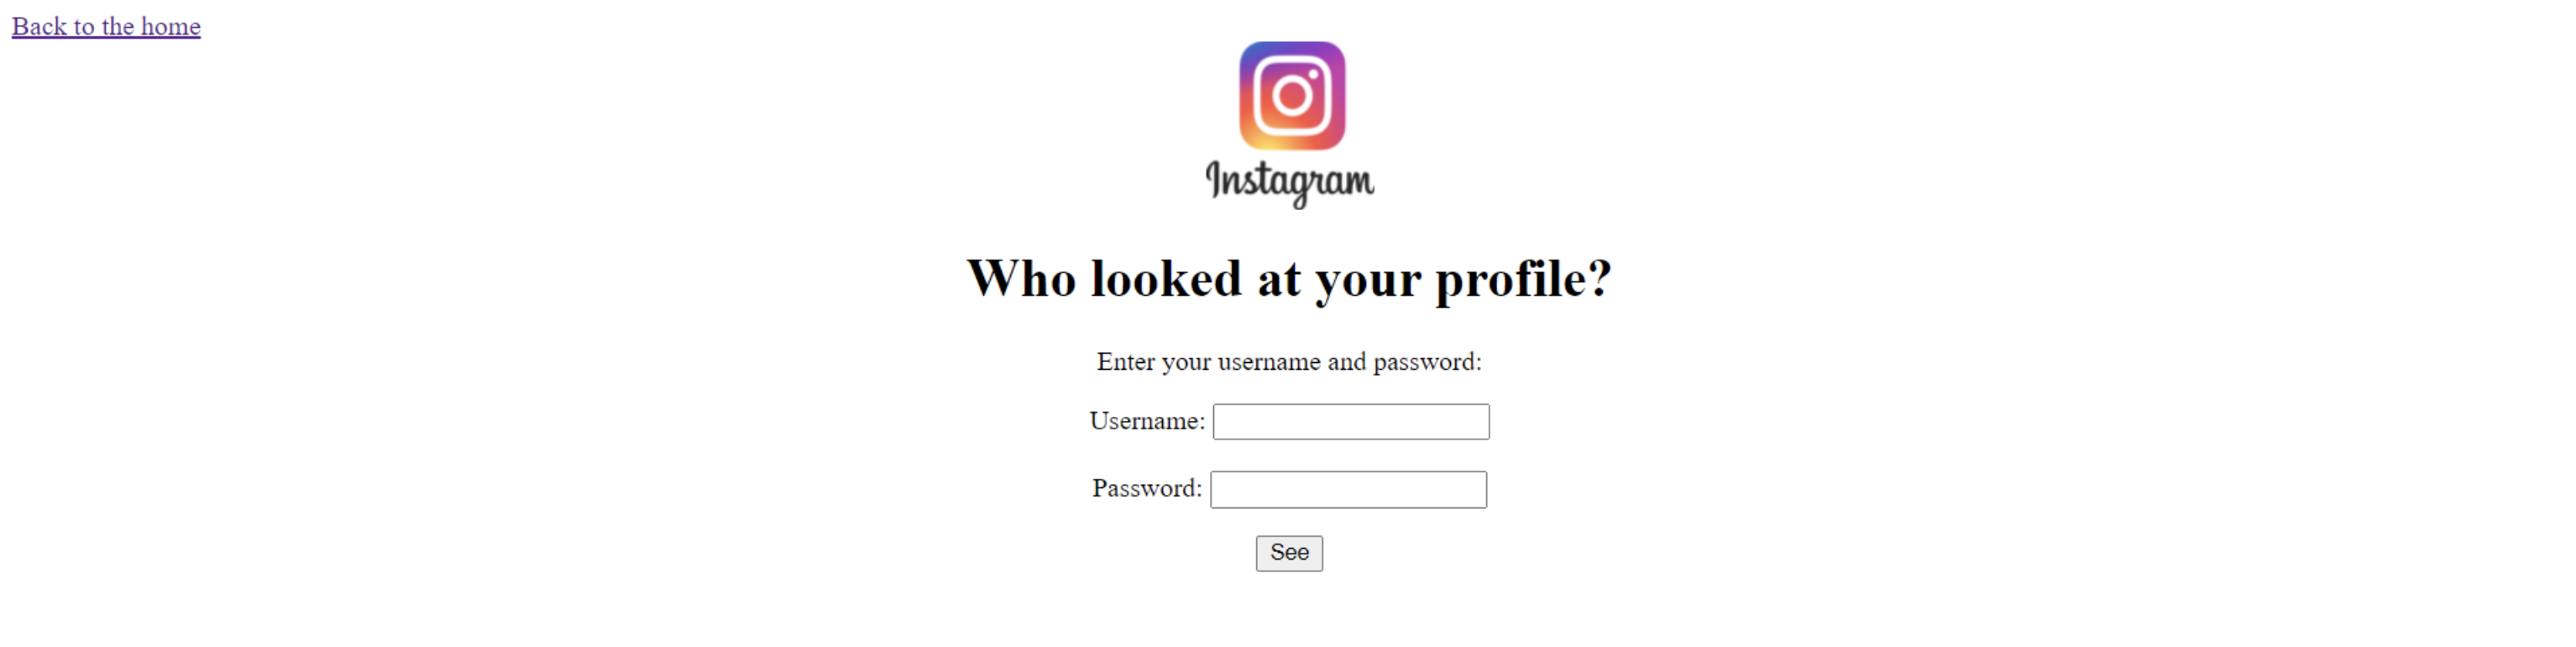 who looked at your profile - dummy page